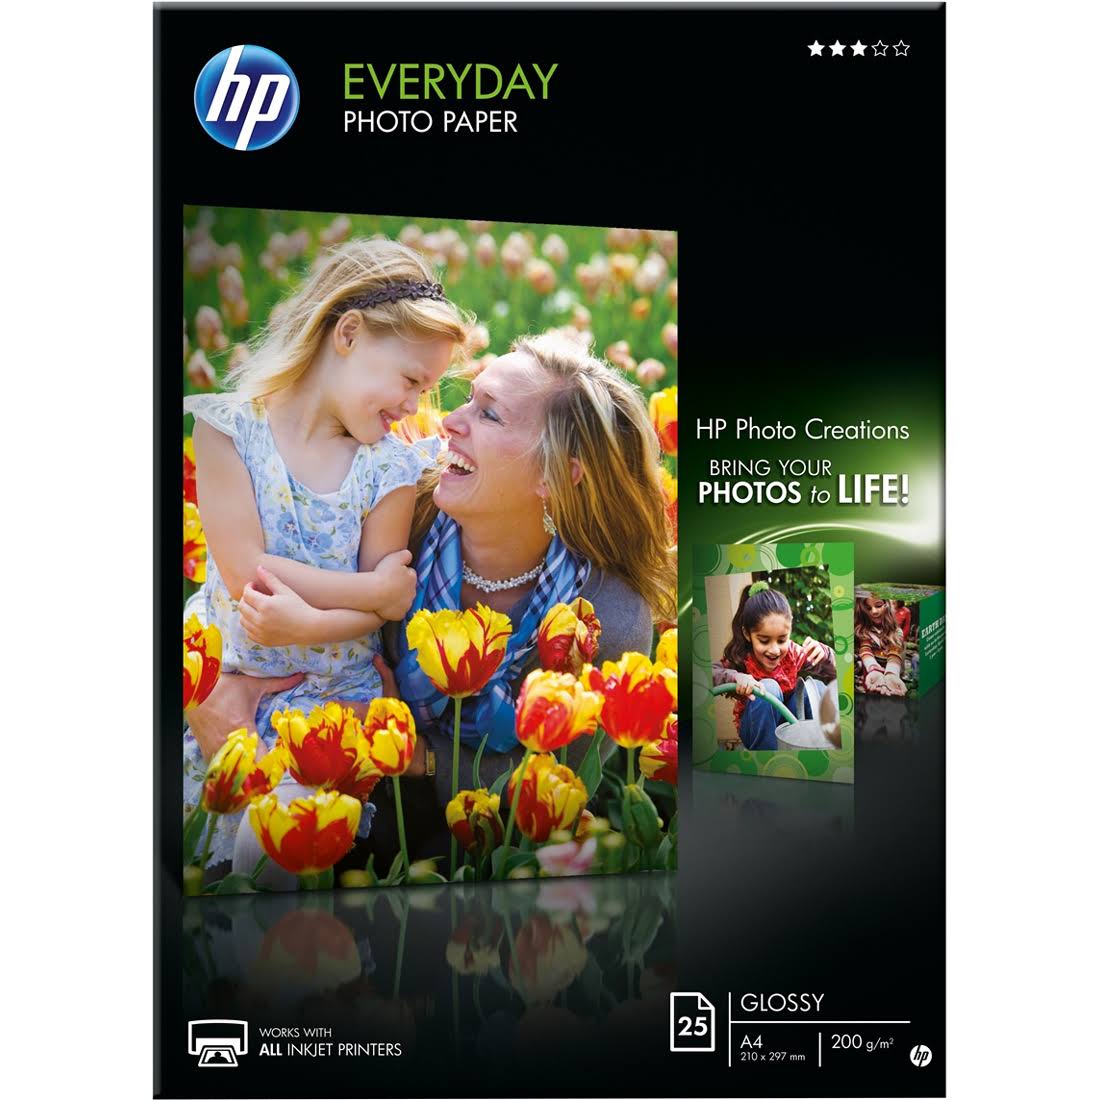 HP Everyday Photo Paper - A4, Gloss White, 25 Sheets